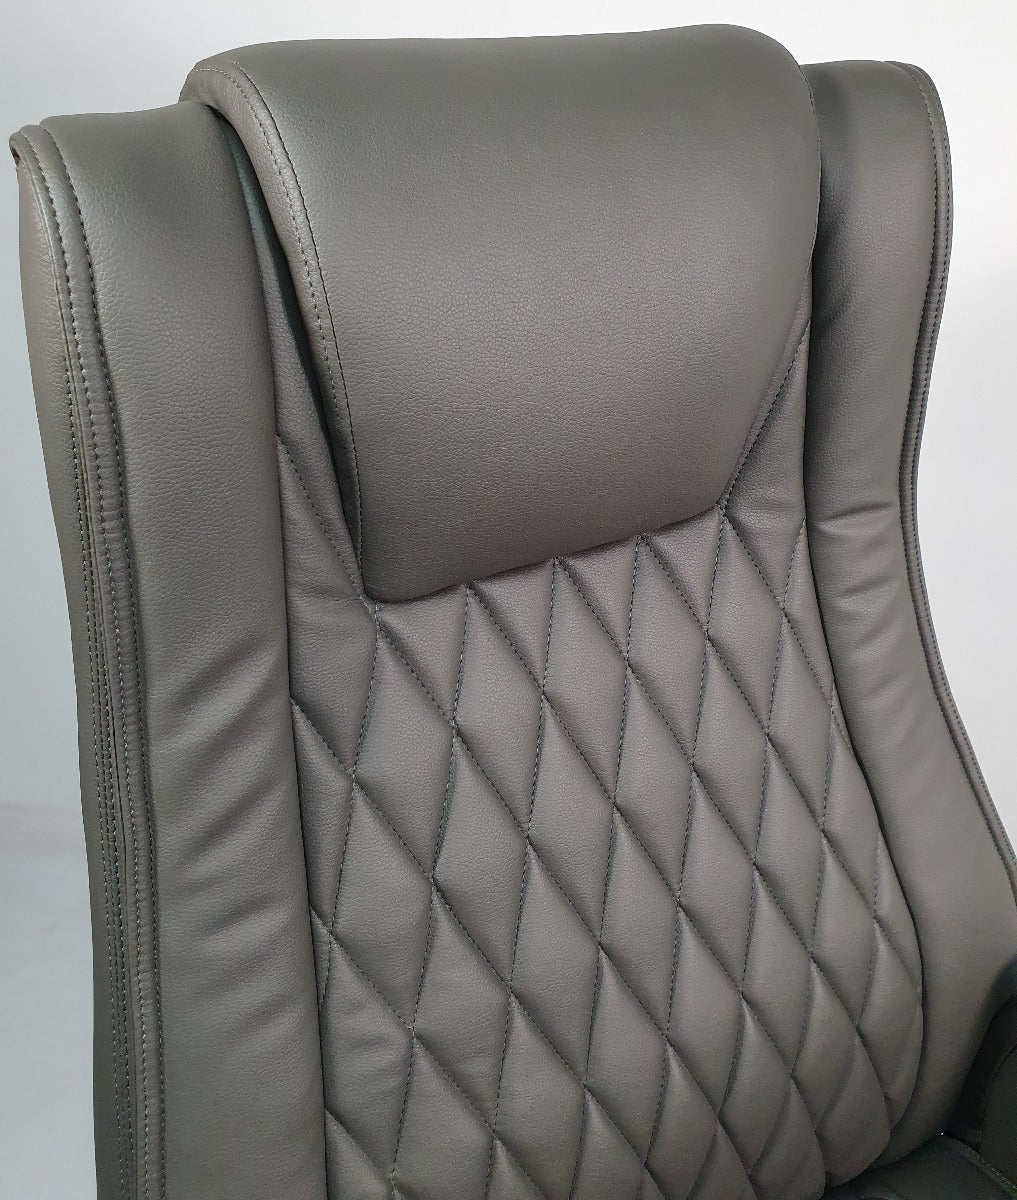 Grey Leather Executive Office Chair - CHA-1202A